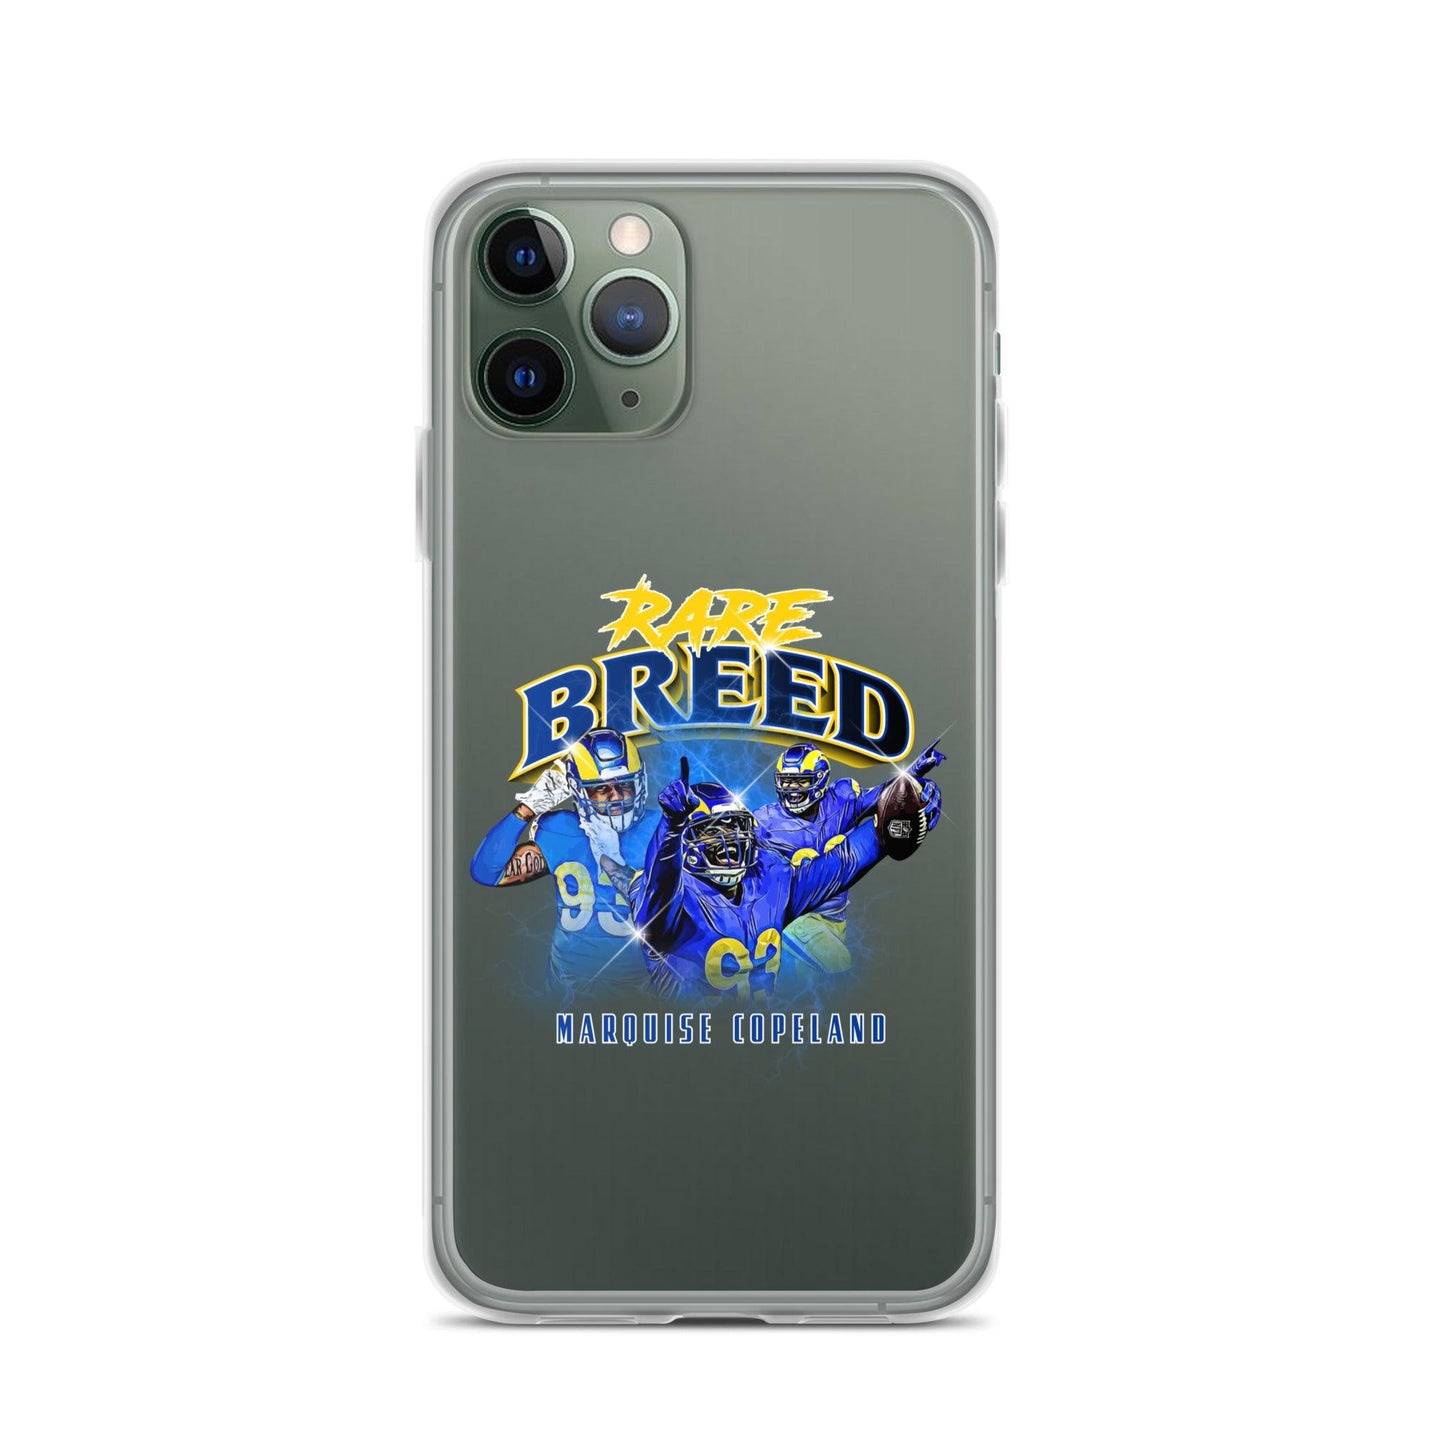 Marquise Copeland "Rare Breed" iPhone Case - Fan Arch